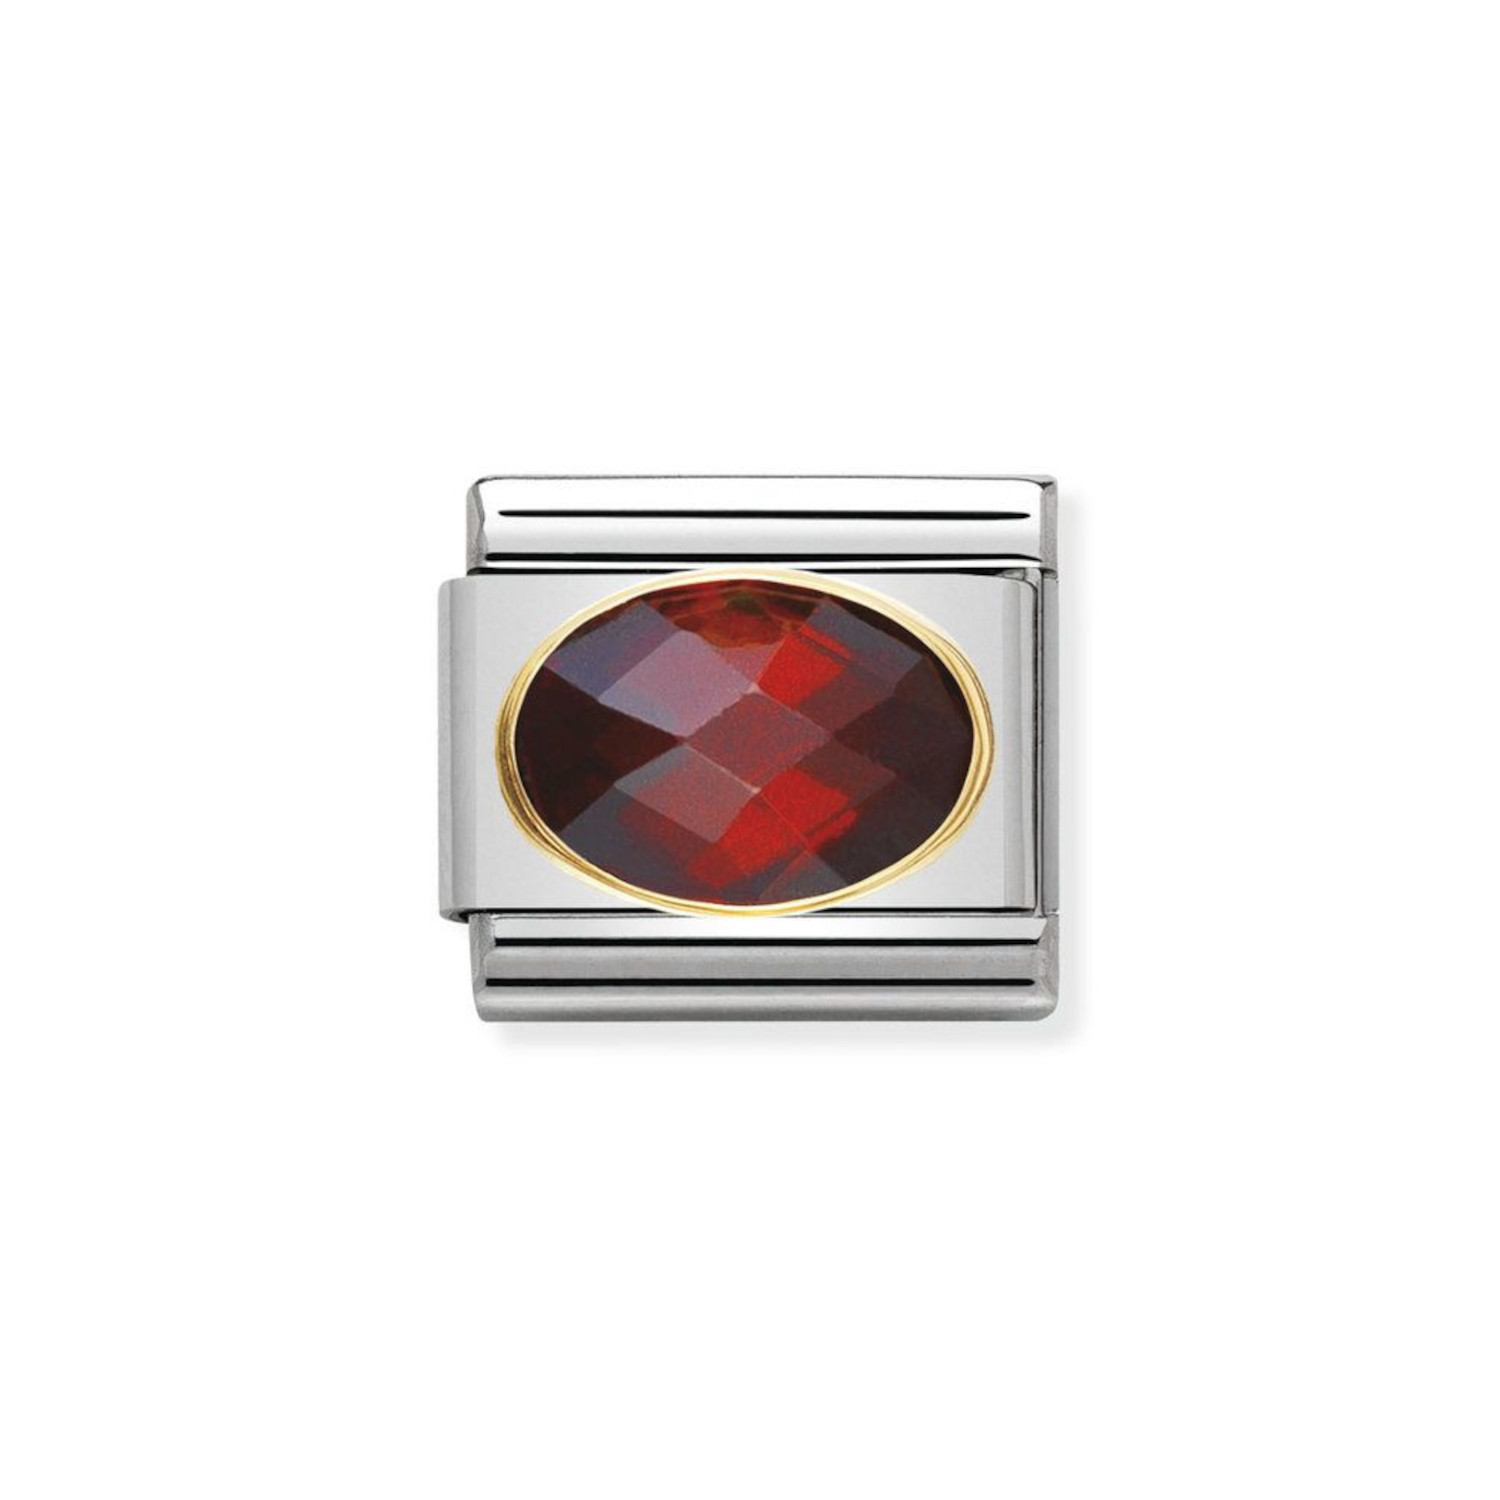 NOMINATION COMPOSABLE CLASSIC LINK IN 18K GOLD WITH RED AND FACETED STONE 030601/005